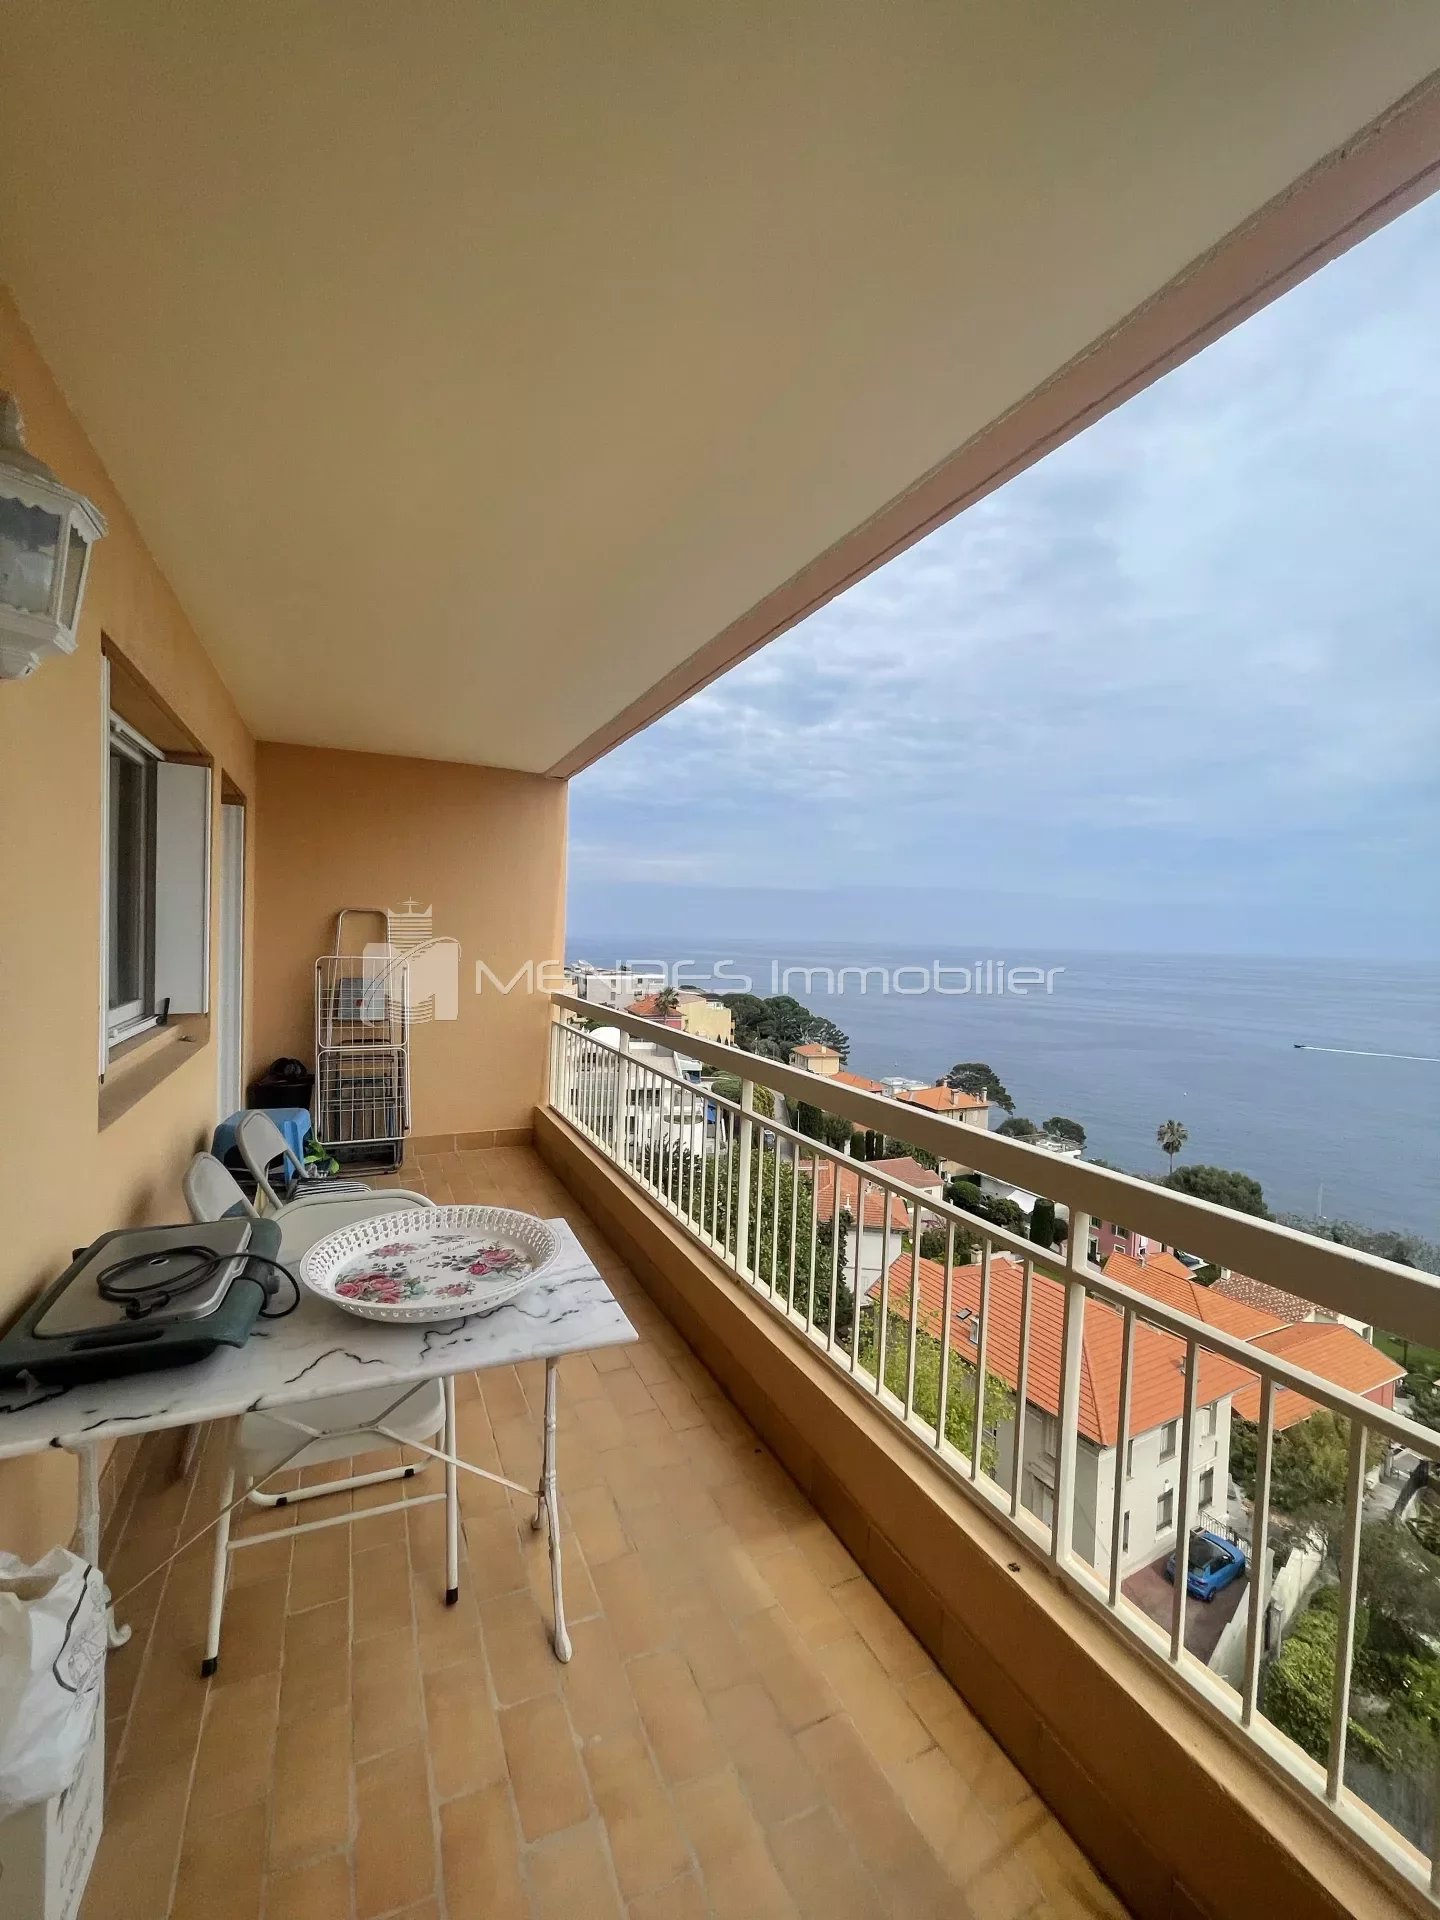 LARGE 1BR CLOSE TO CENTER OF CAP D'AIL WITH PANORAMIC SEA VIEW